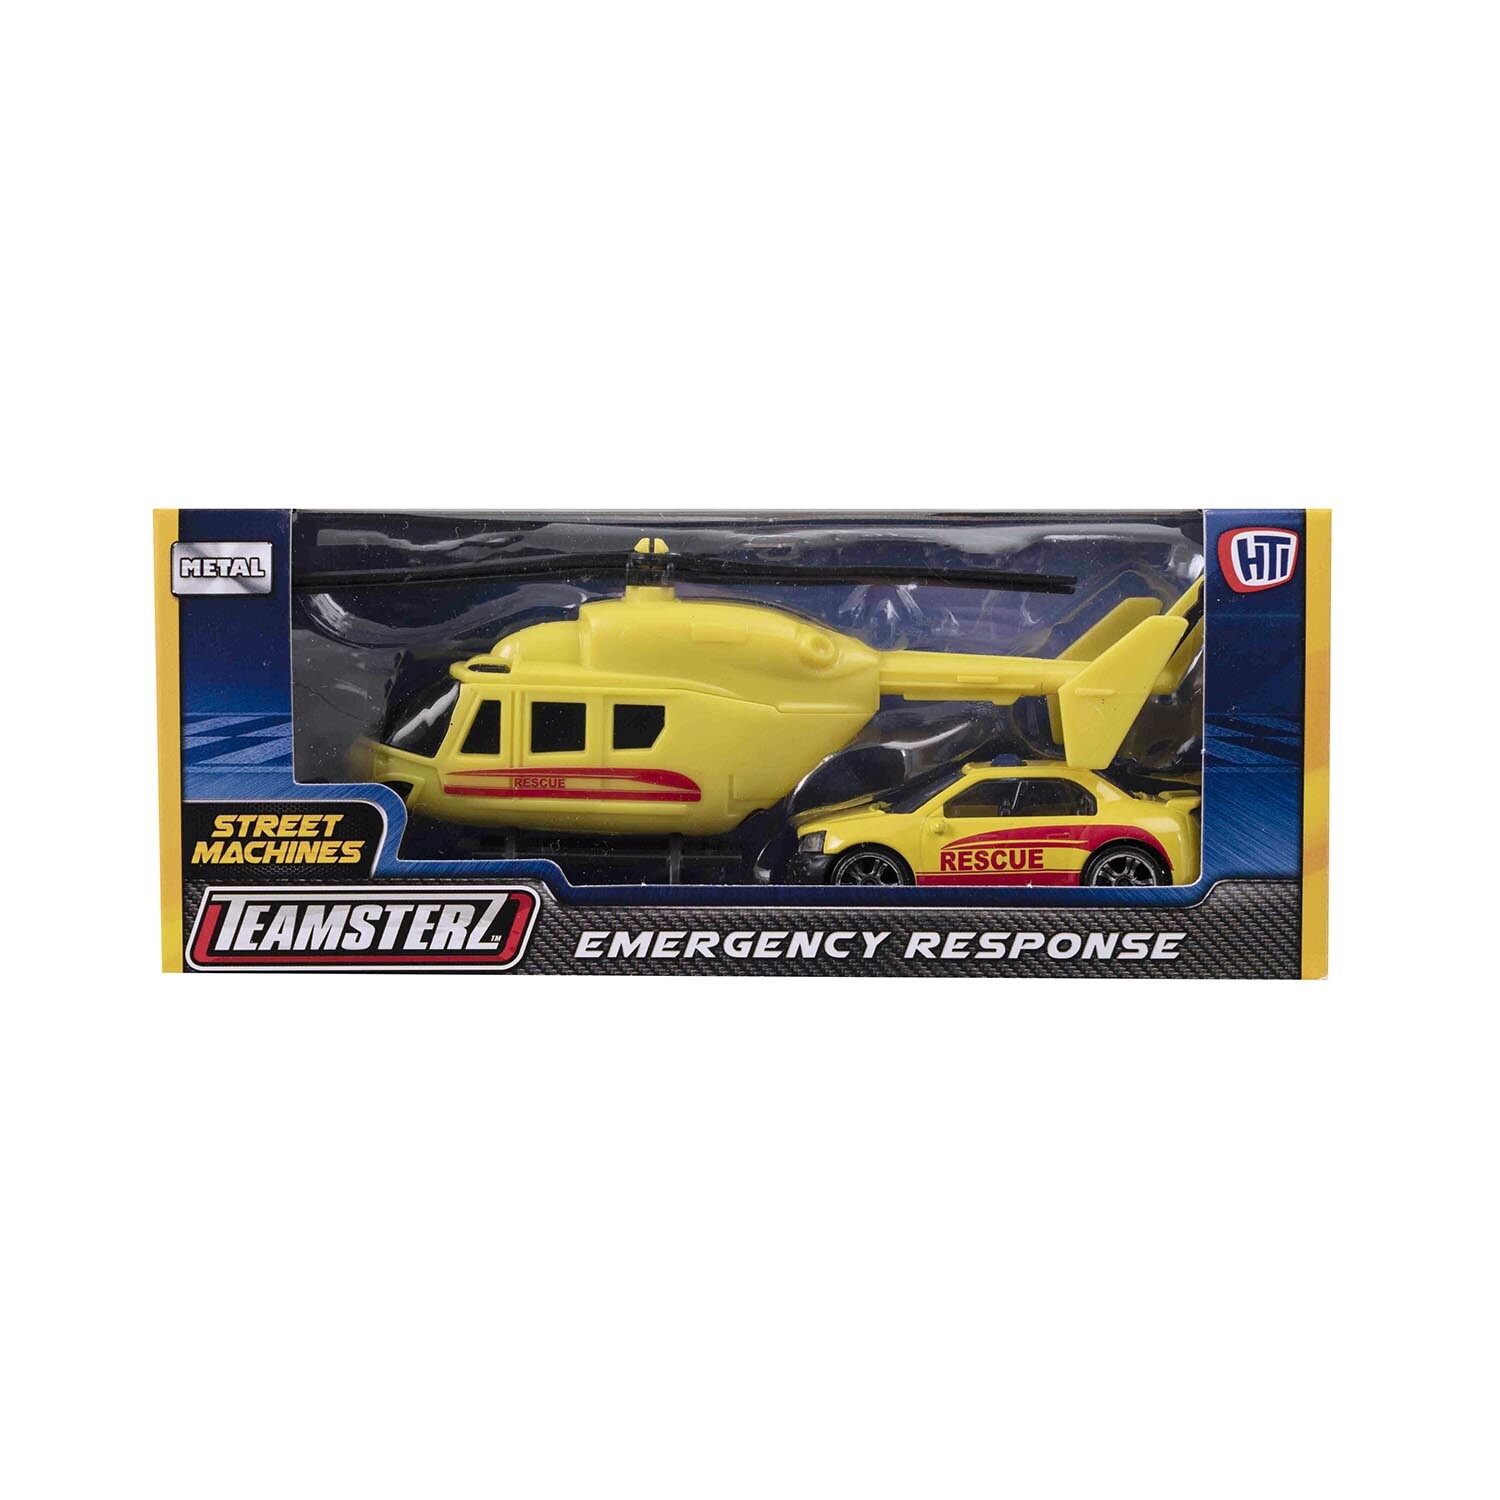 Single Teamsterz Emergency Response Playset in Assorted styles Image